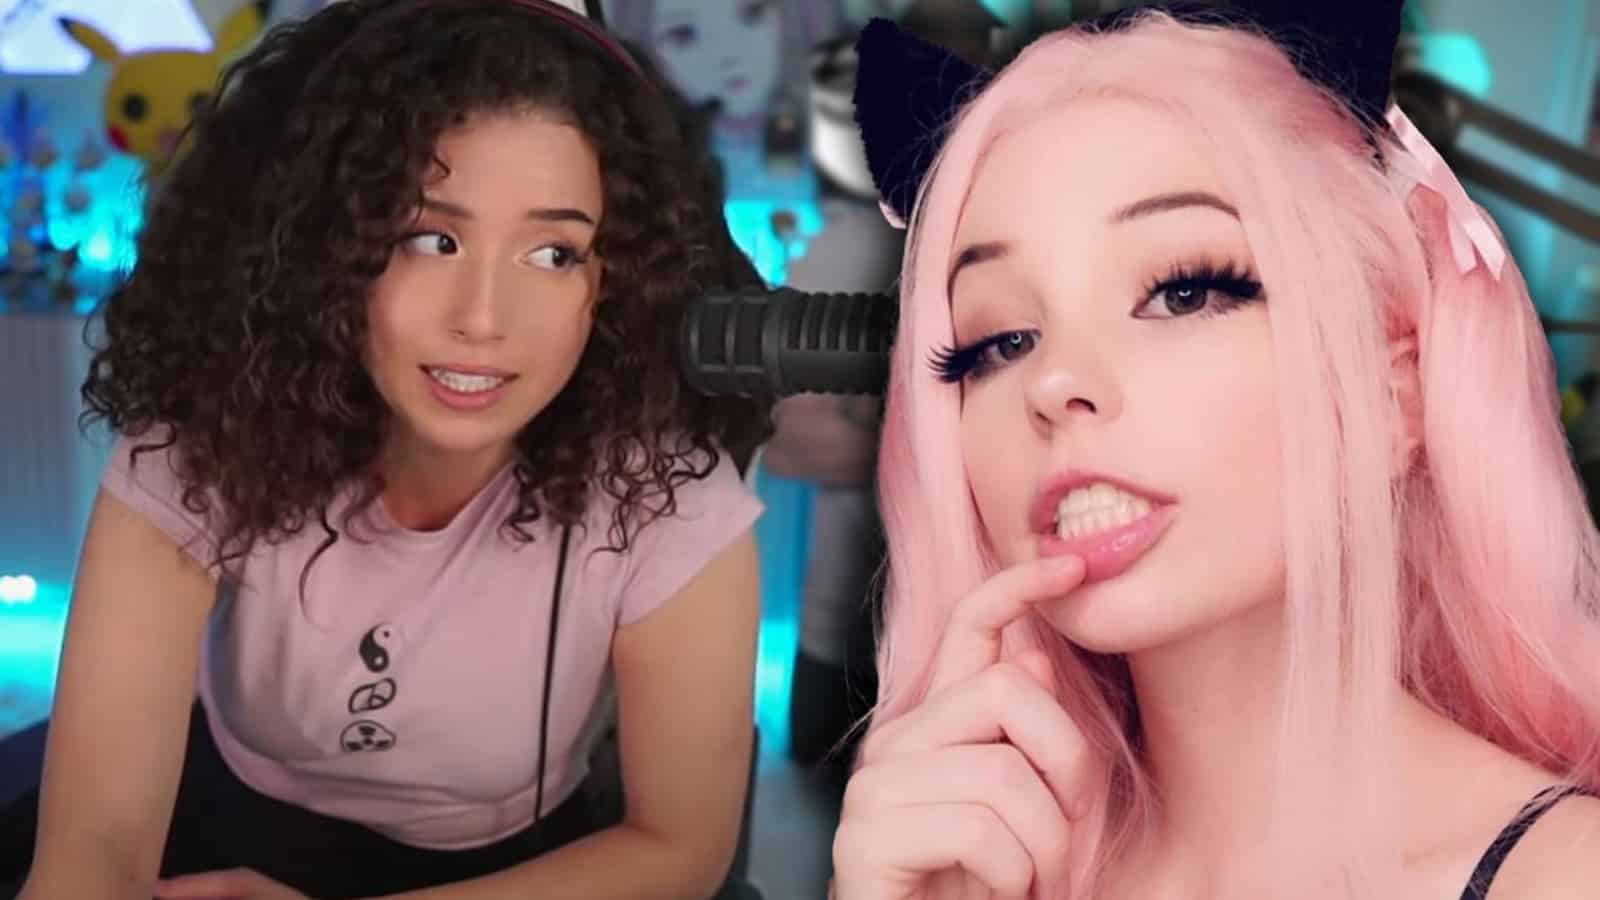 Belle Delphine Without Makeup